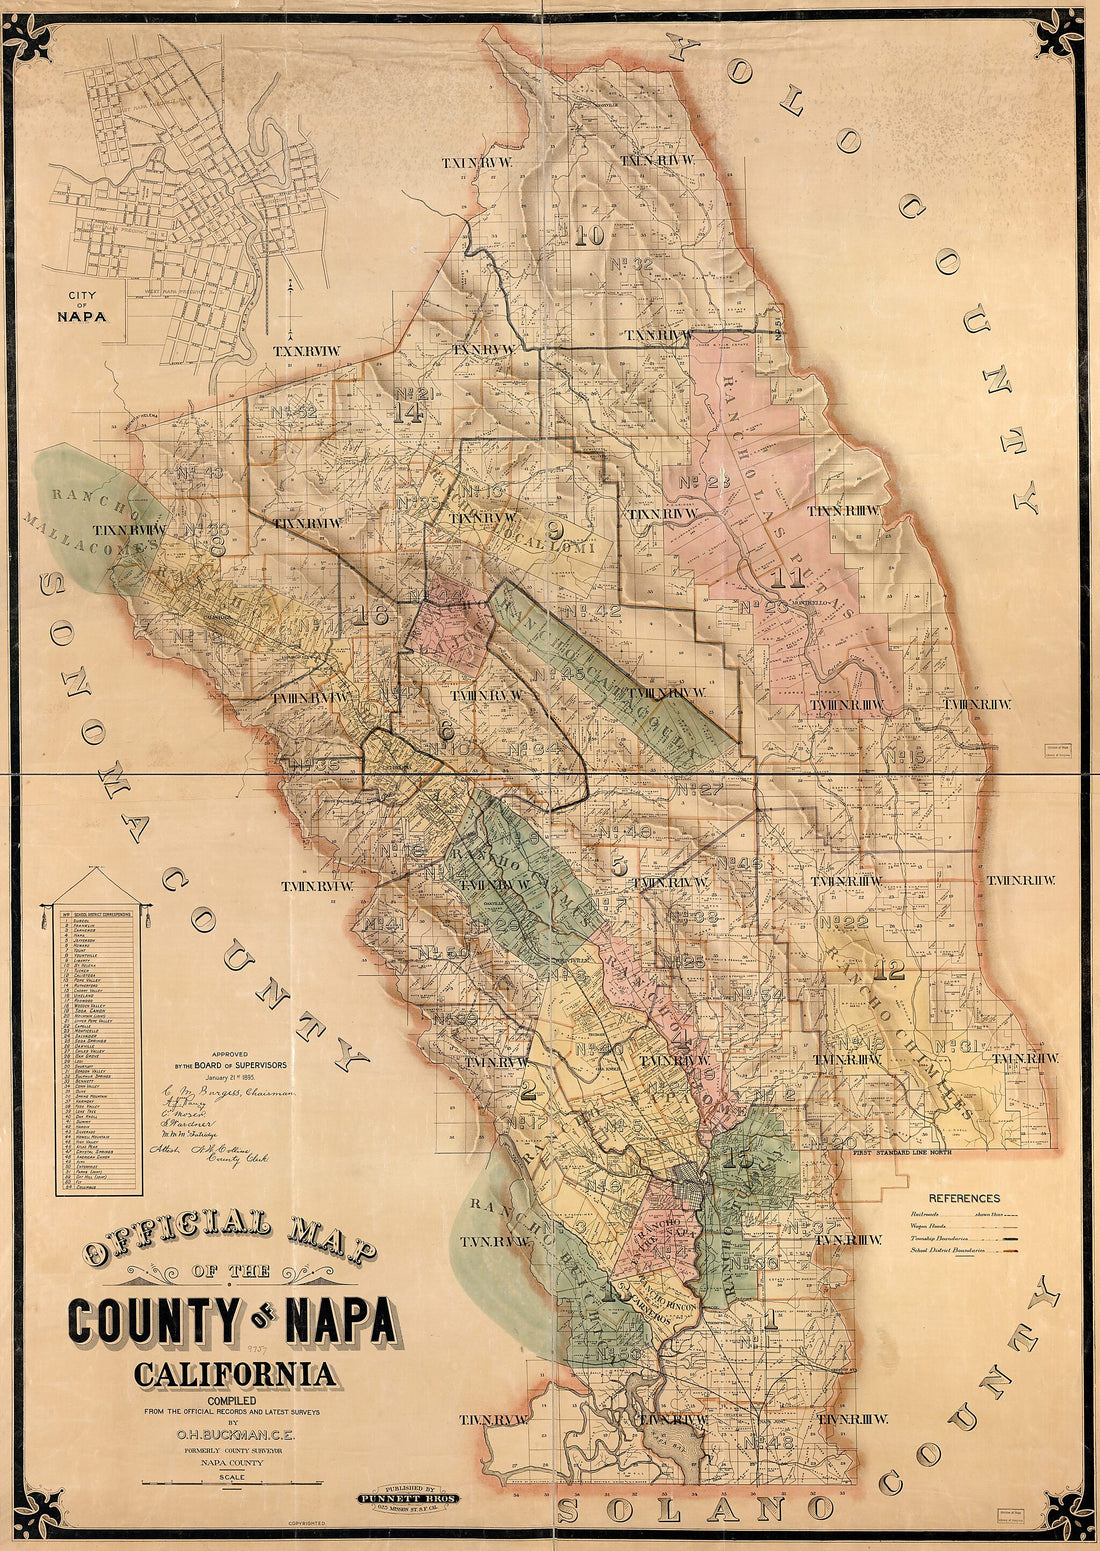 This old map of Official Map of the County of Napa, California : Compiled from the Official Records and Latest Surveys from 1895 was created by O. H. (Oliver H.) Buckman,  Punnett Brothers in 1895